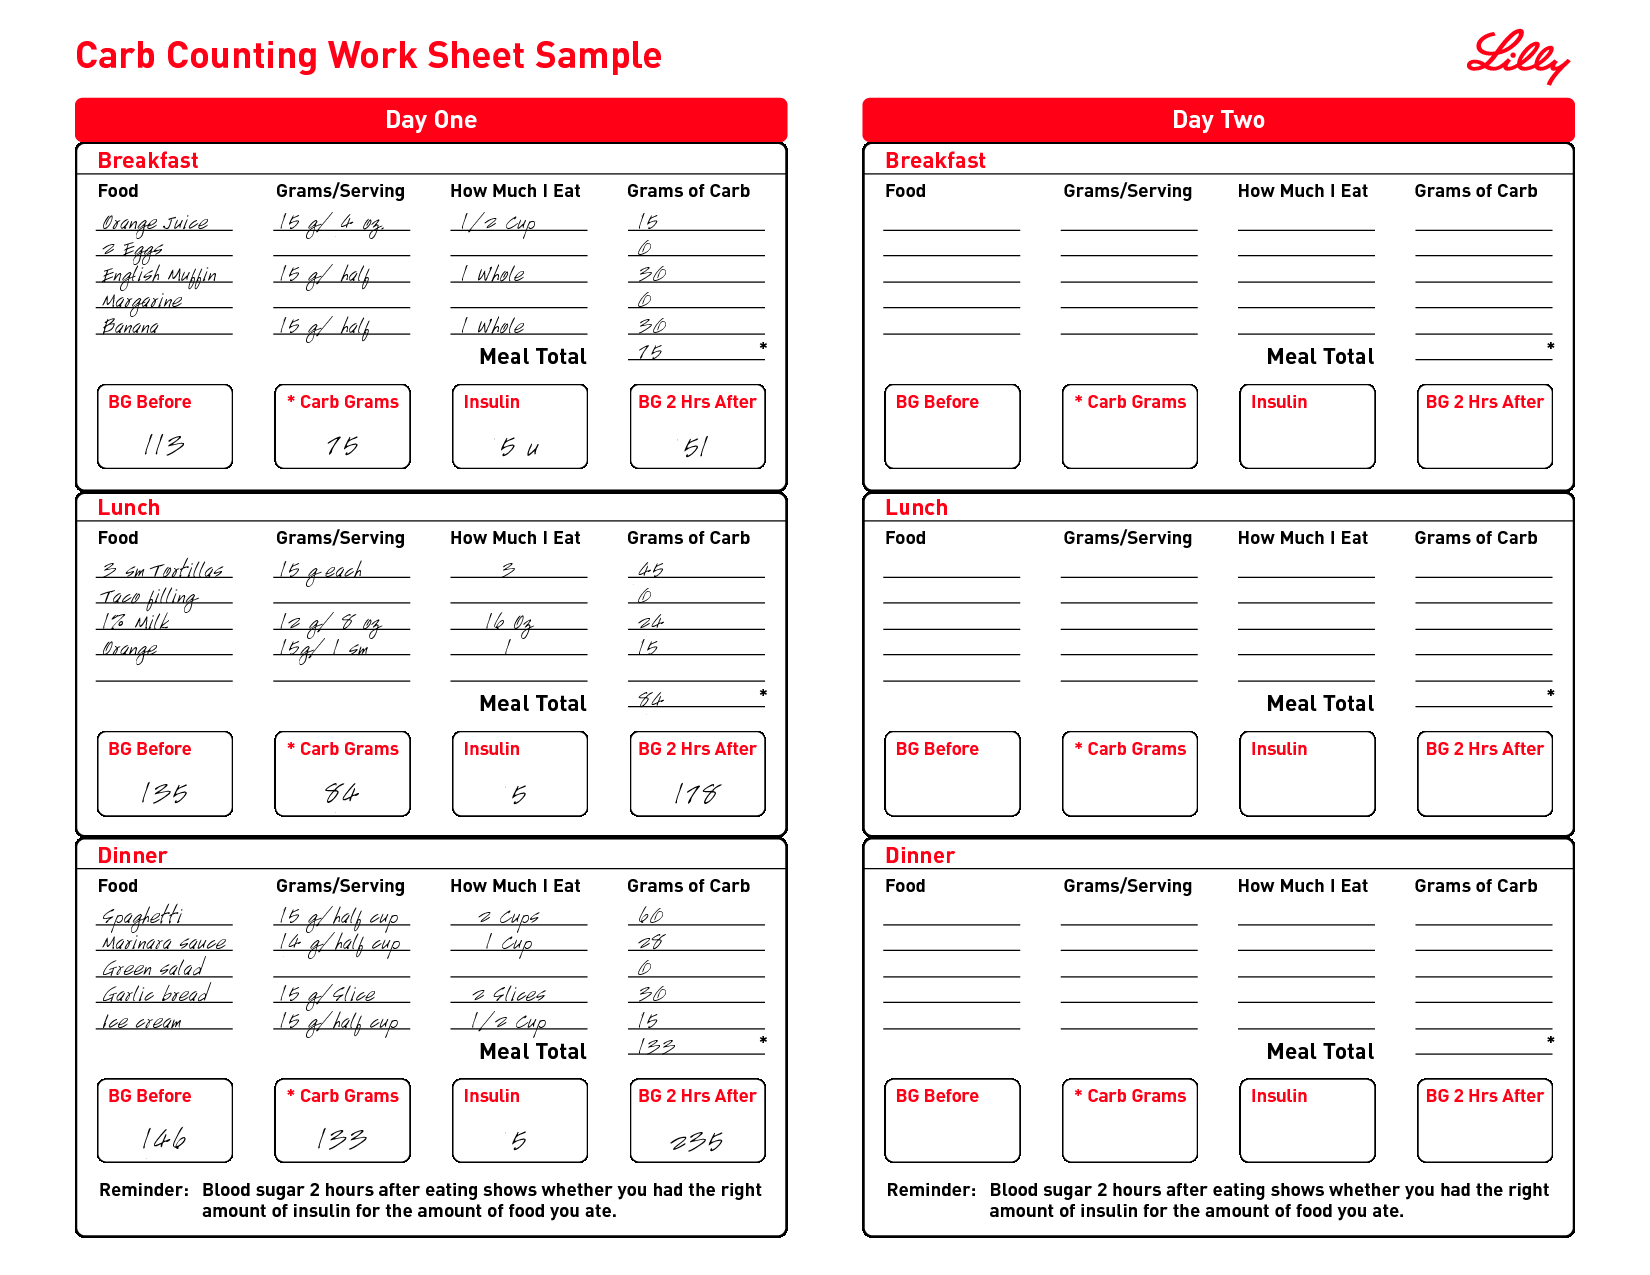 Free Print Carb Counter Chart | Carb Counting Work Sheet Sample - Free Printable Calorie Chart